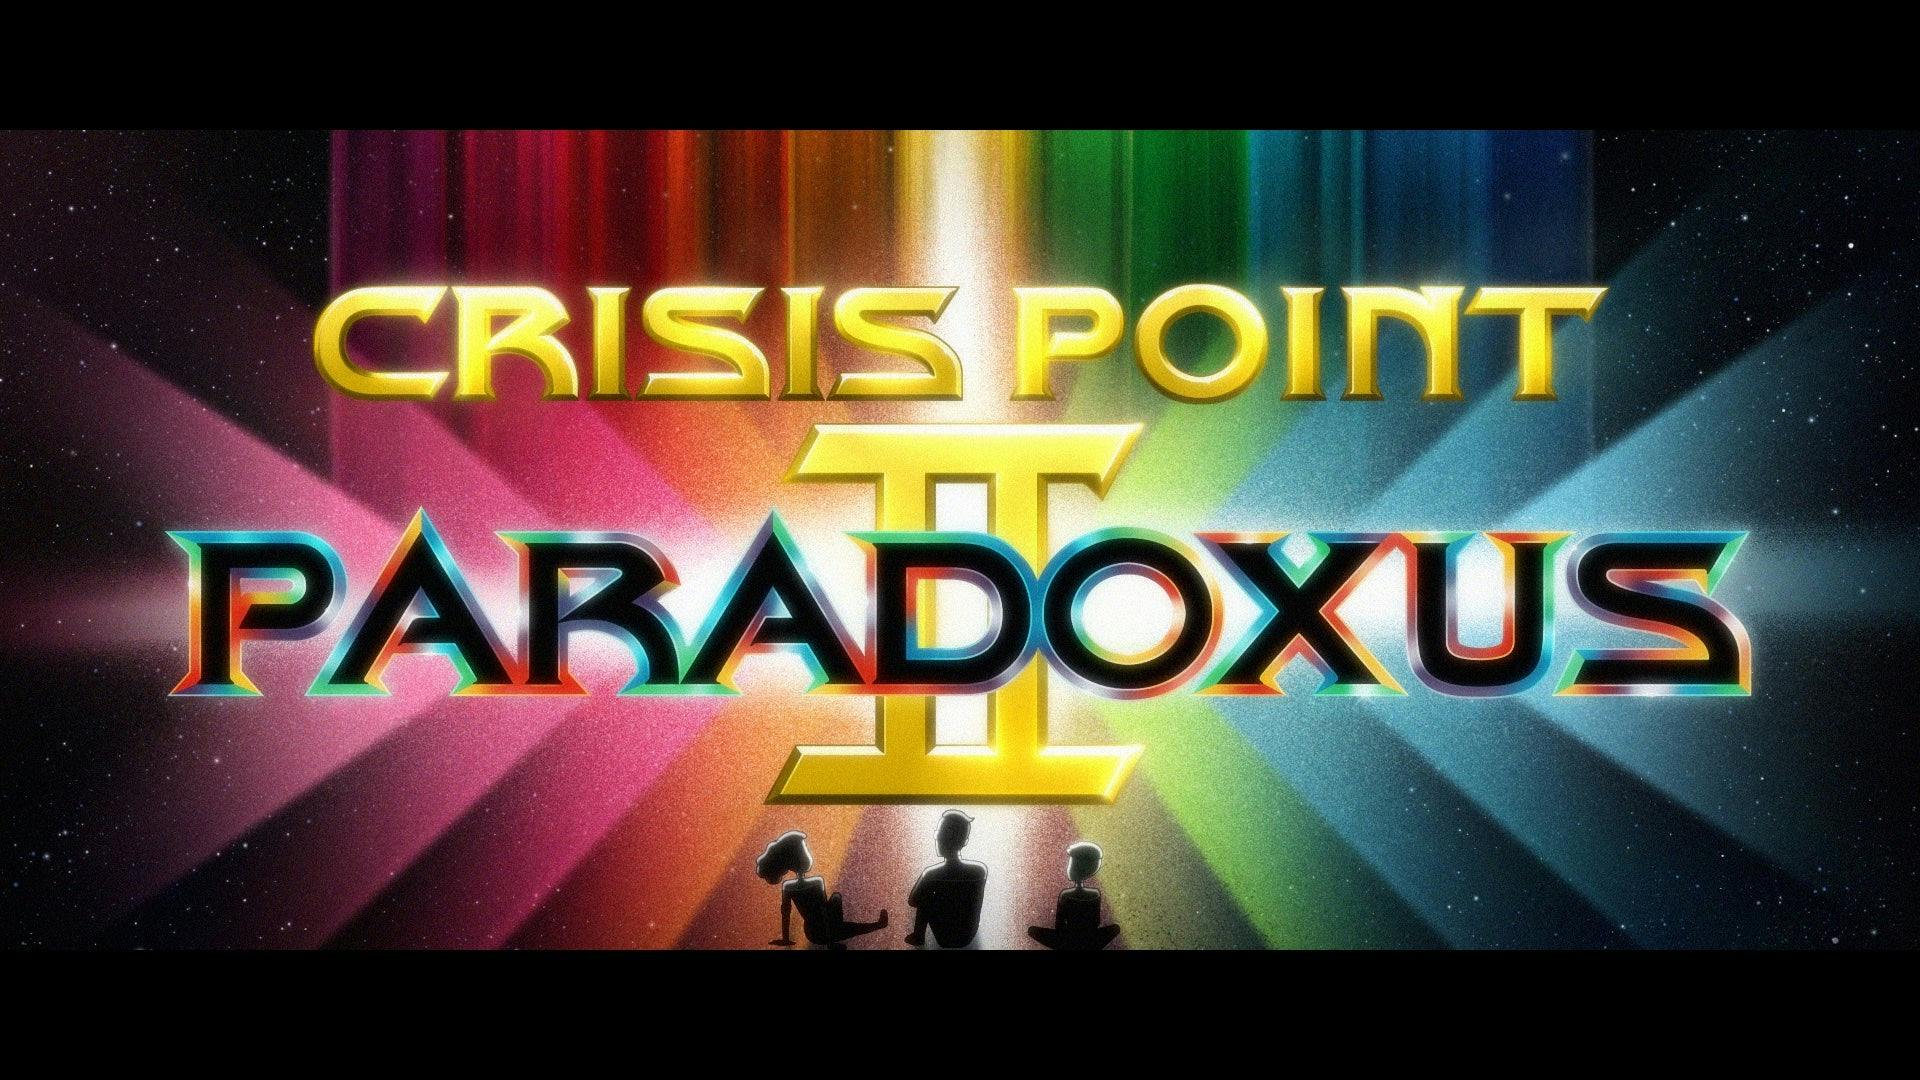 The title card for Crisis Point 2: Paradoxus. The outlines of Mariner, Rutherford, and Tendi are sitting watching it.